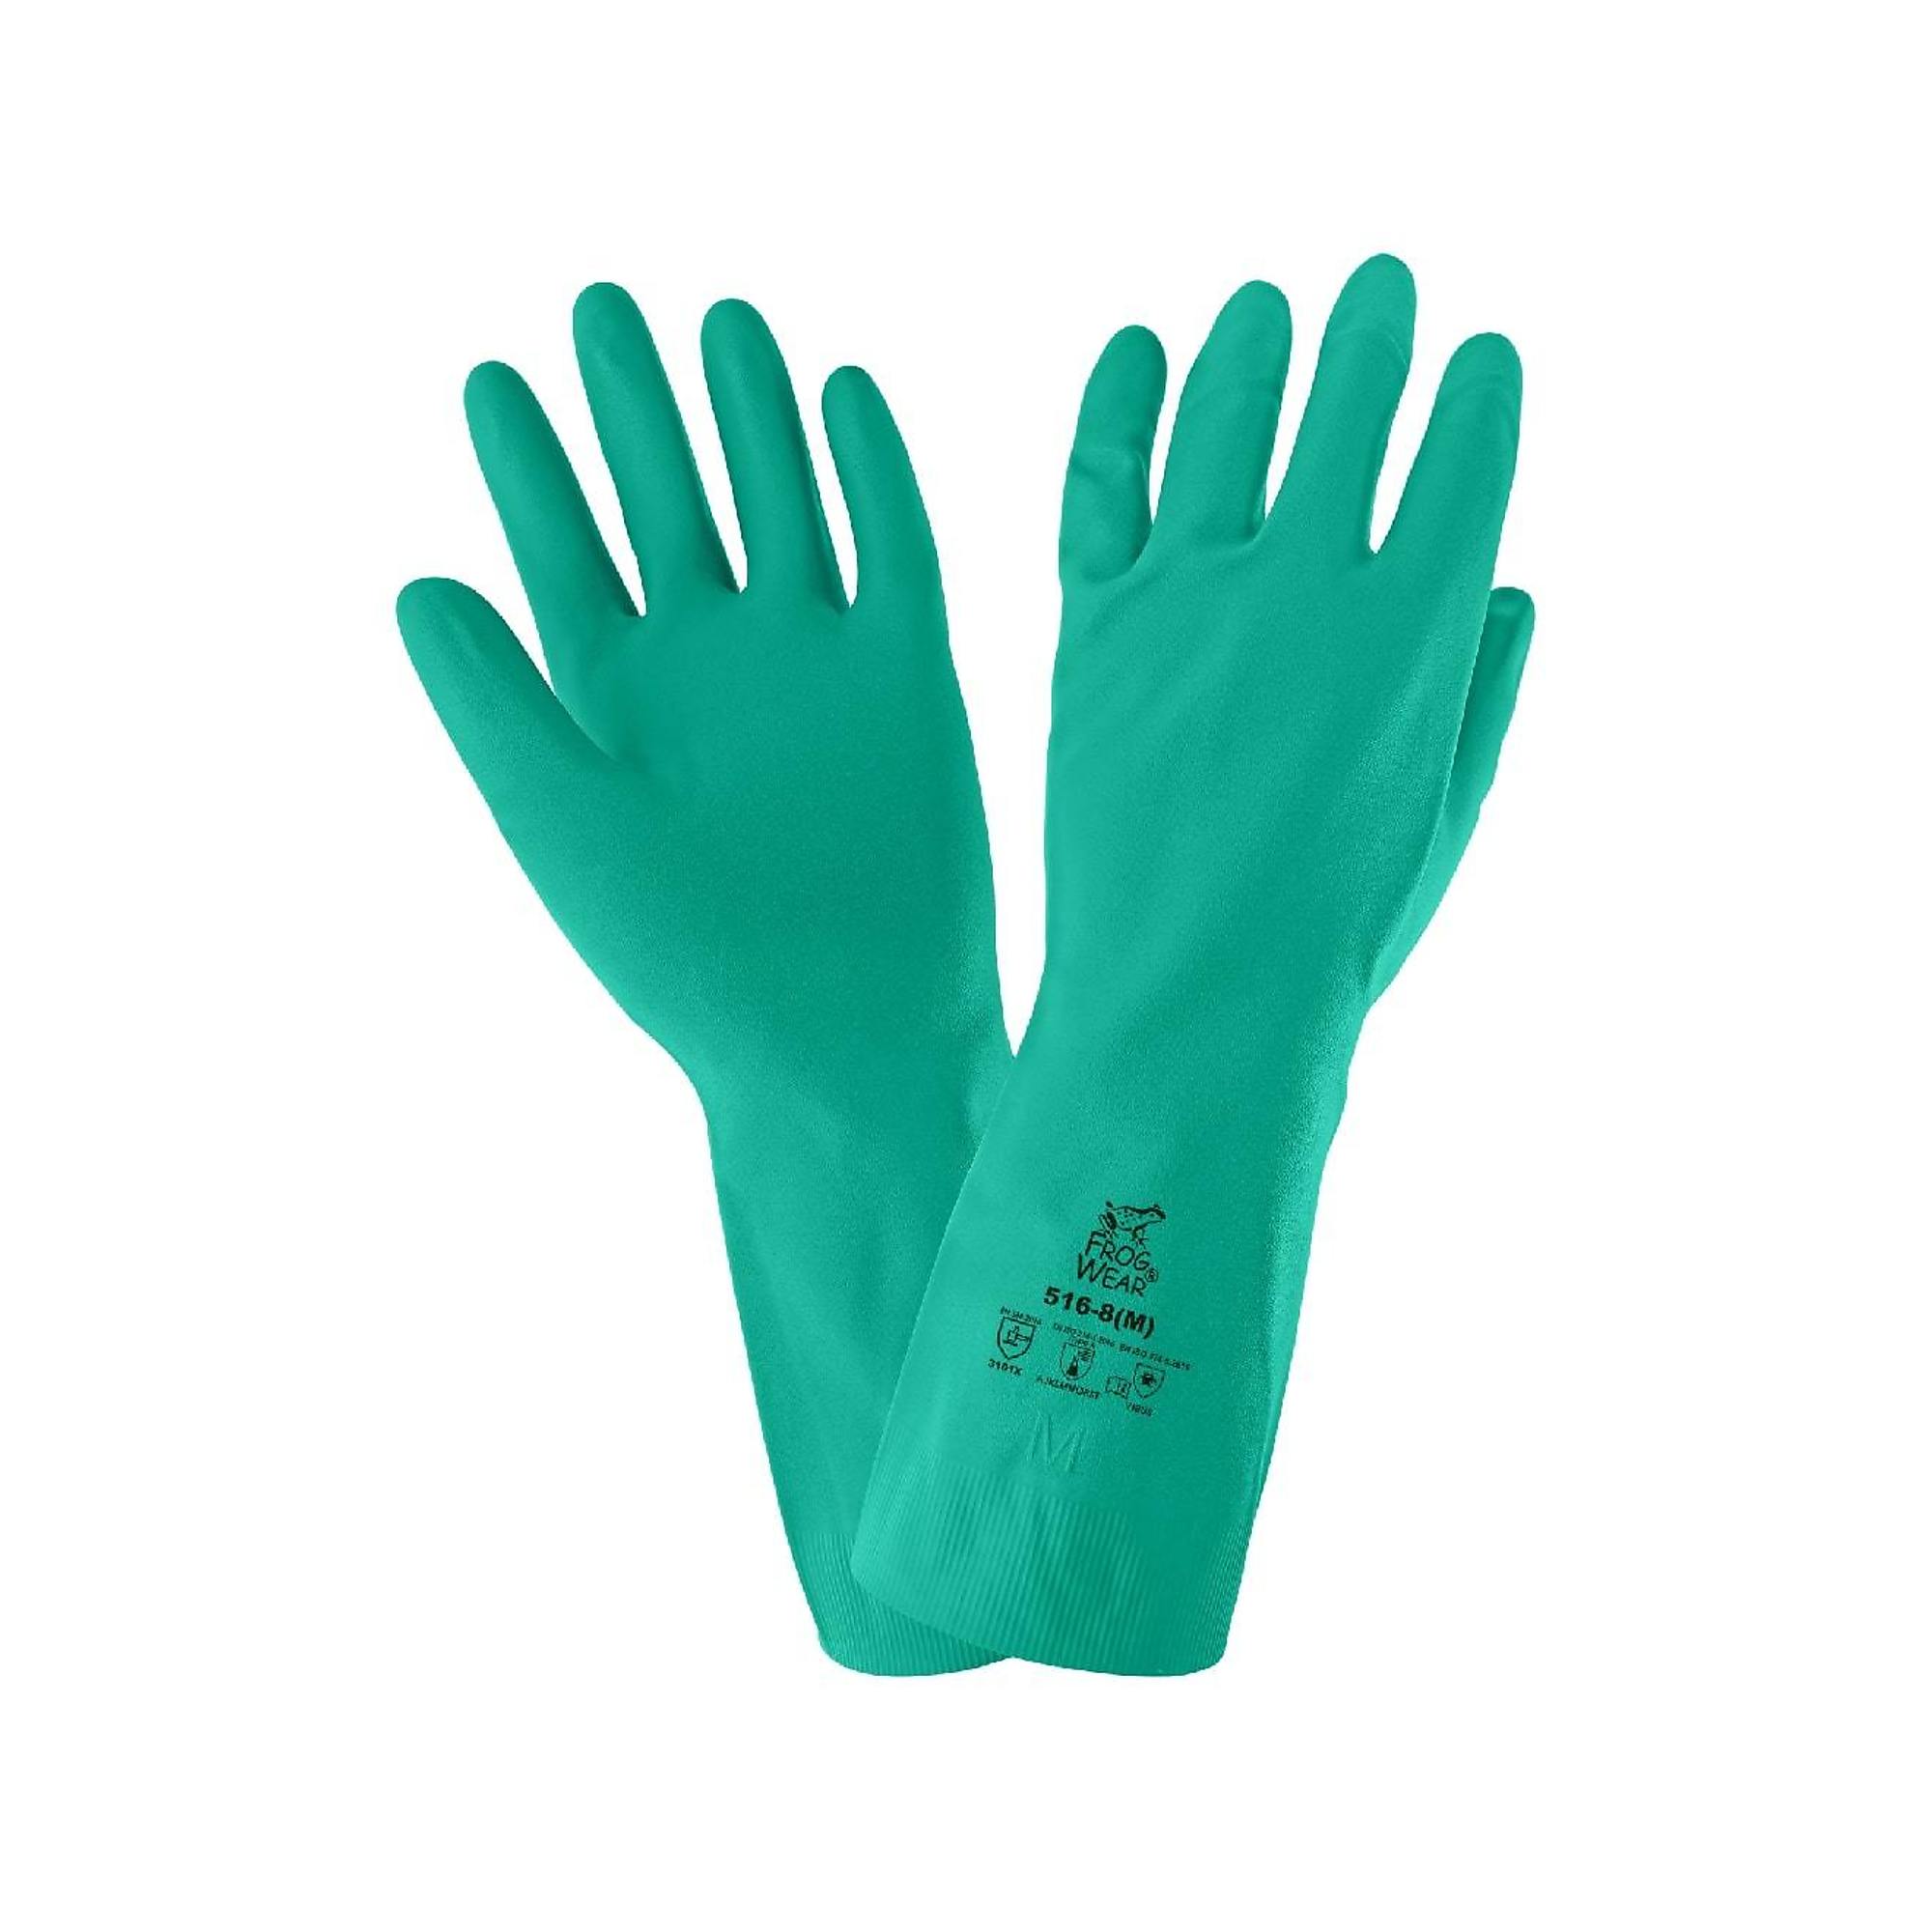 FrogWear, FrogWear 13Inch, 16-Mil, Sea Green Nitrile Gloves - 12 Pairs, Size L, Color Green, Included (qty.) 12 Model 516-9(L)